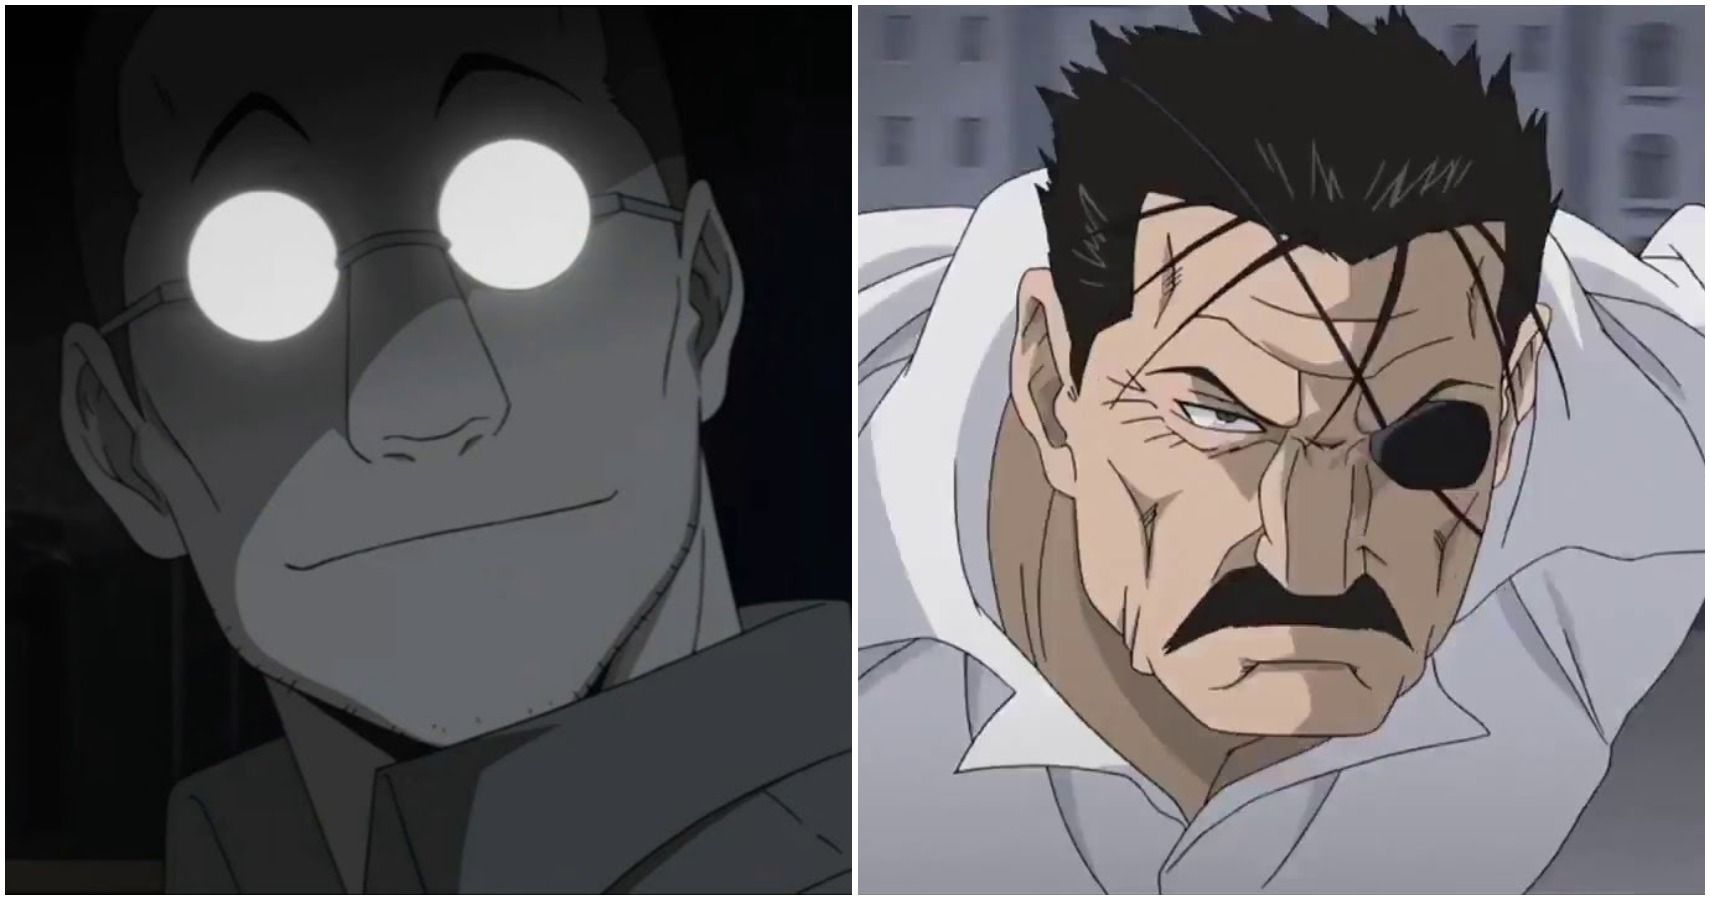 Top 15 Fullmetal Alchemist: Brotherhood Characters – THE REVIEW MONSTER